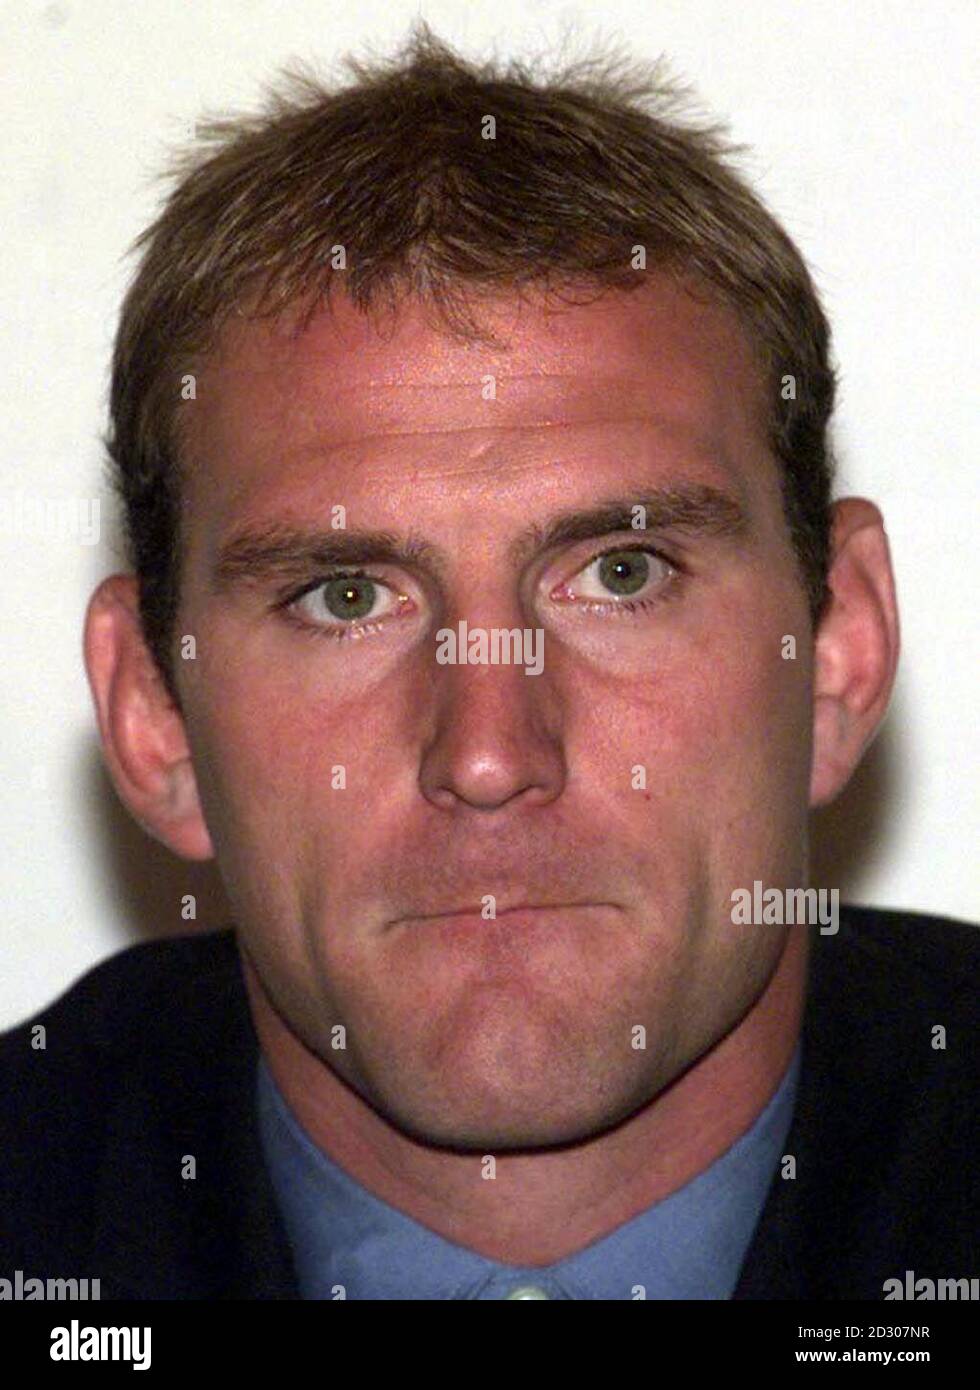 Lawrence Dallaglio during a news conference at the Rugby Football Union's headquarters in Twickenham, London, to say why he resigned the England Rugby Union captaincy despite categorically denying illegal drug allegations against him. * 4/8/99: Dallaglio has been charged by English rugby union bosses with bringing the game into disrepute. He must now appear before a specially convened three-man RFU disciplinary panel and faces suspension if found guilty. England Rugby Union captain Lawrence Dallaglio, at a Twickenham news conference to name the squad prior to their Five Nations Rugby ma Stock Photo